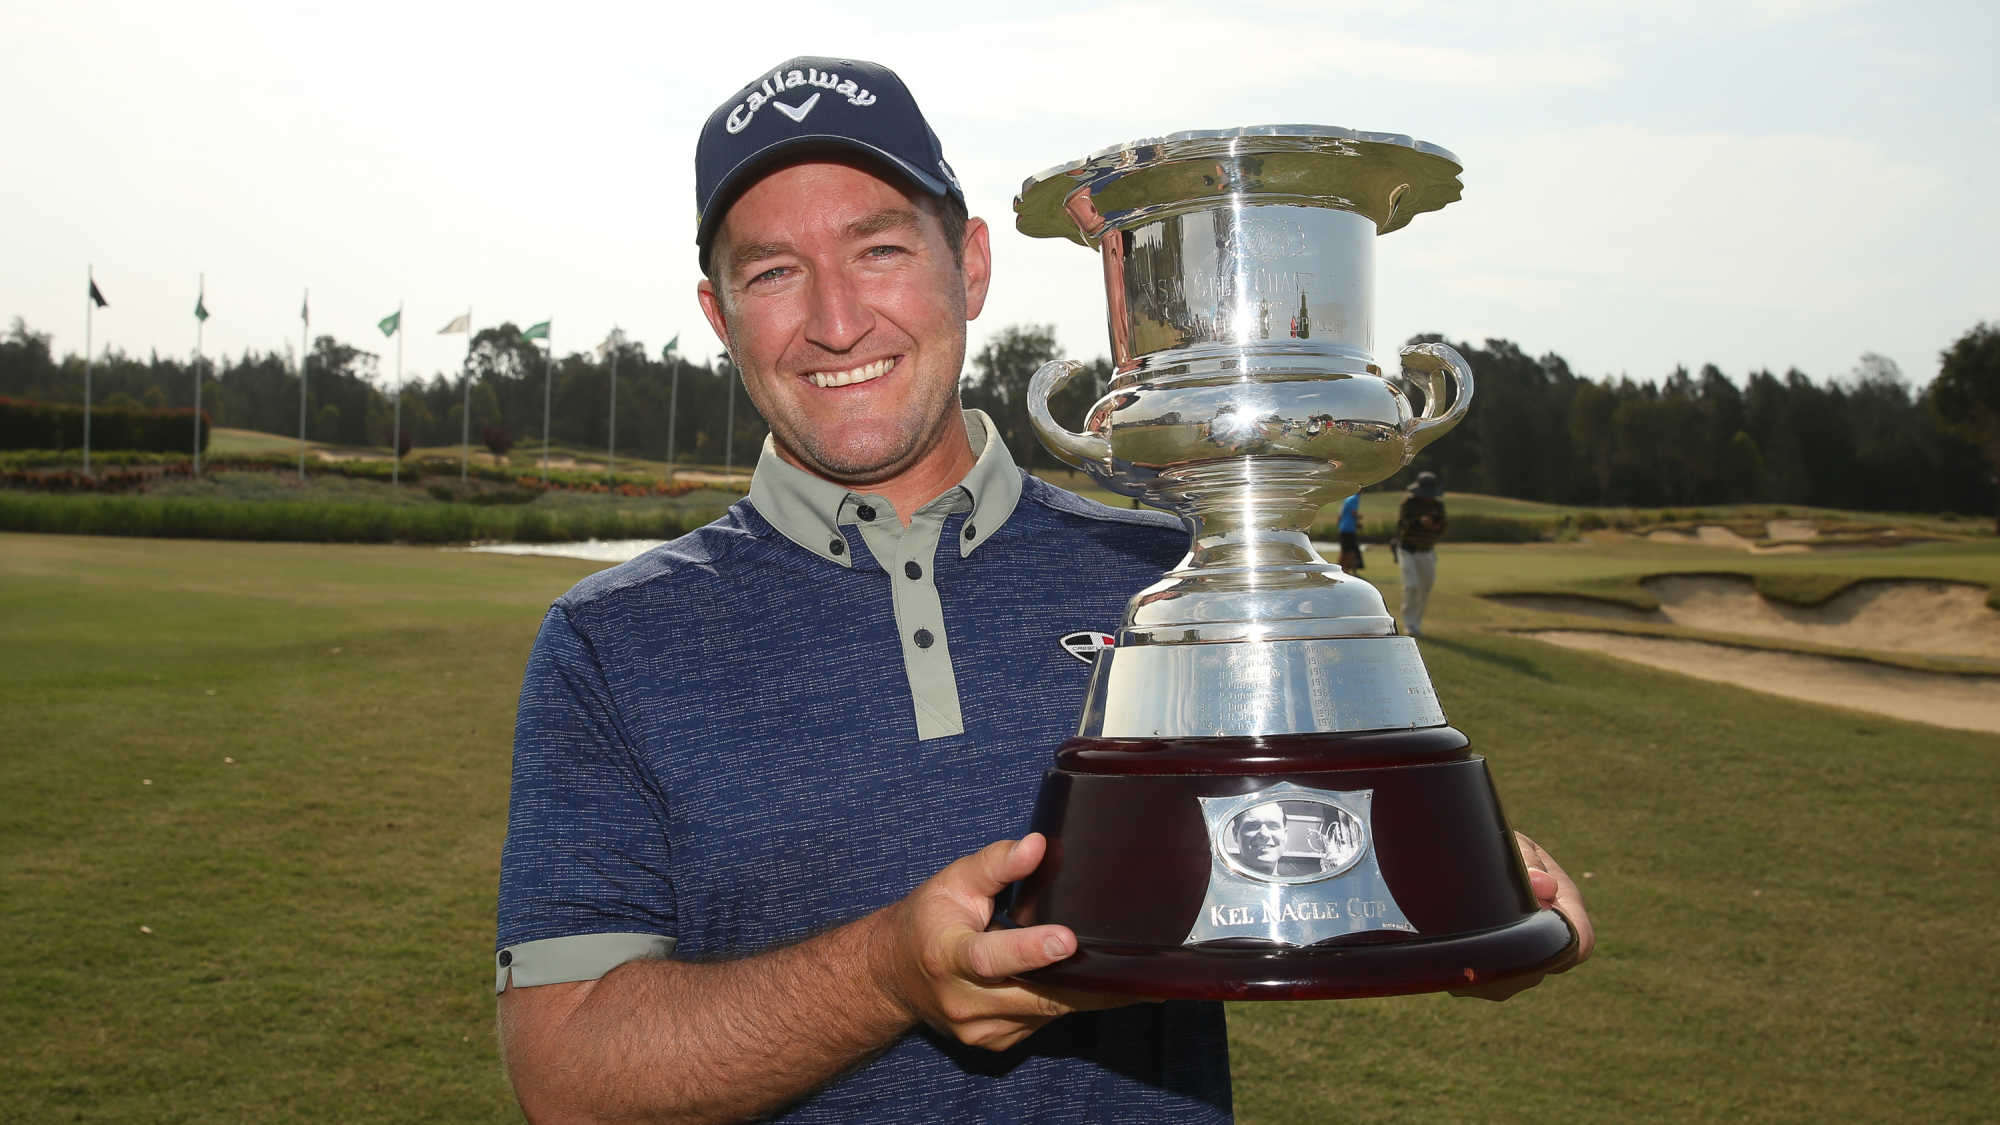 2019 champ Josh Younger proudly shows off the NSW Open trophy.